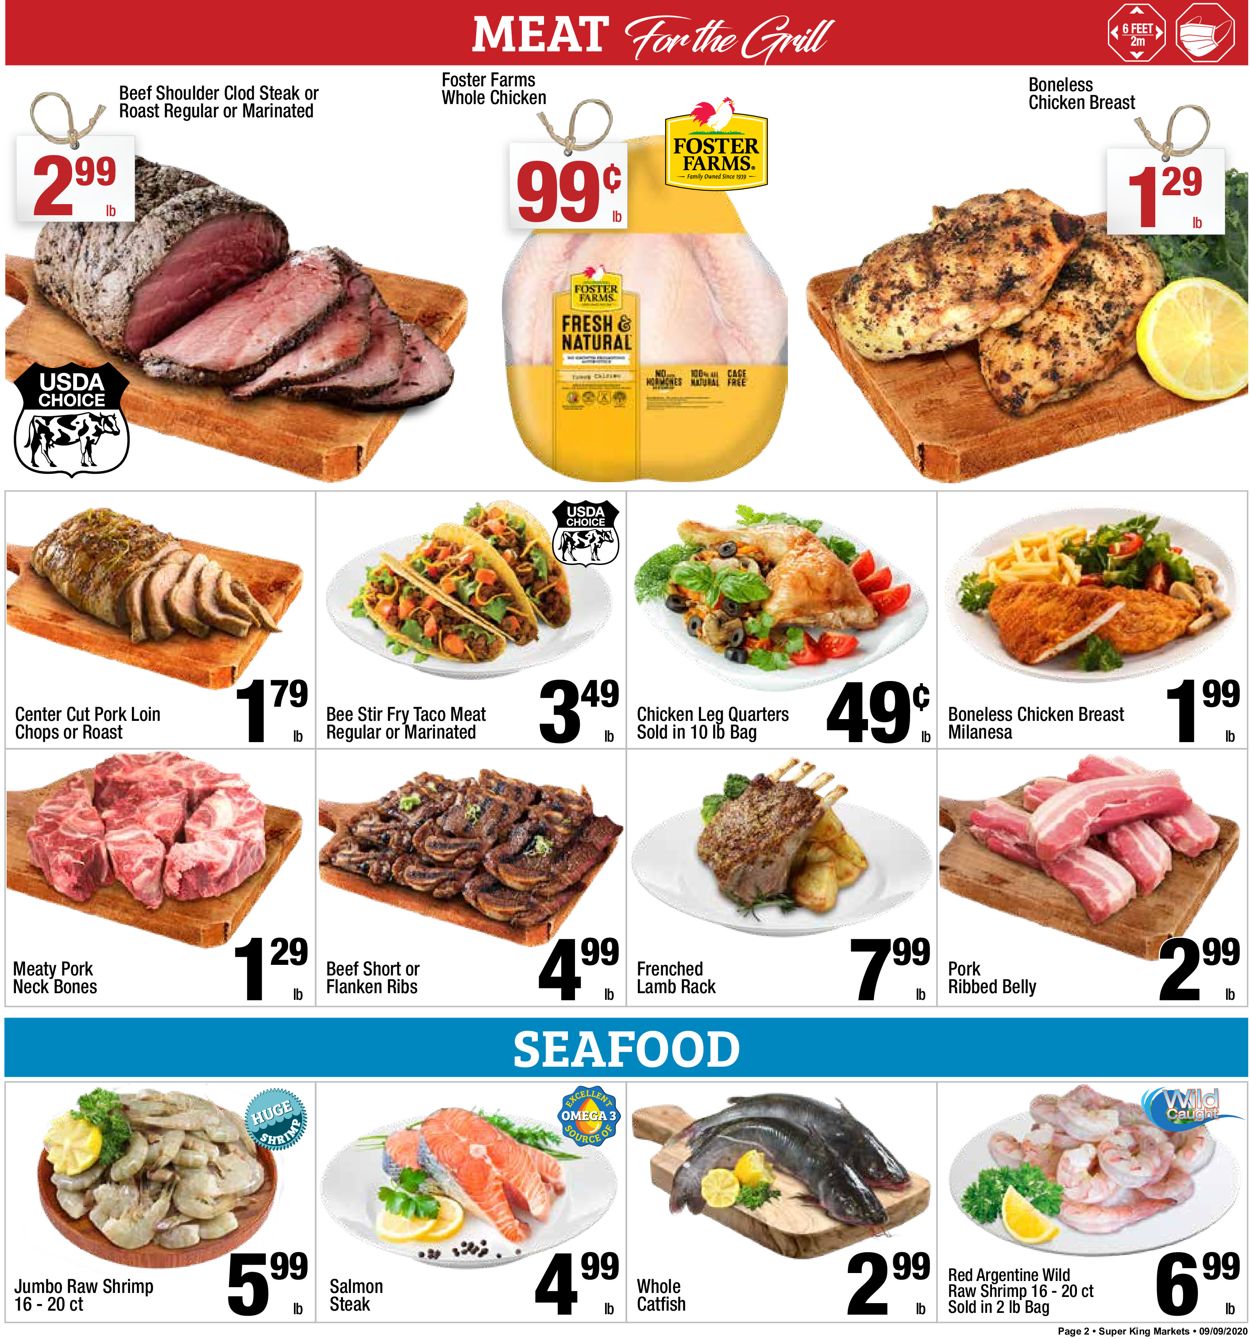 Catalogue Super King Market from 09/09/2020